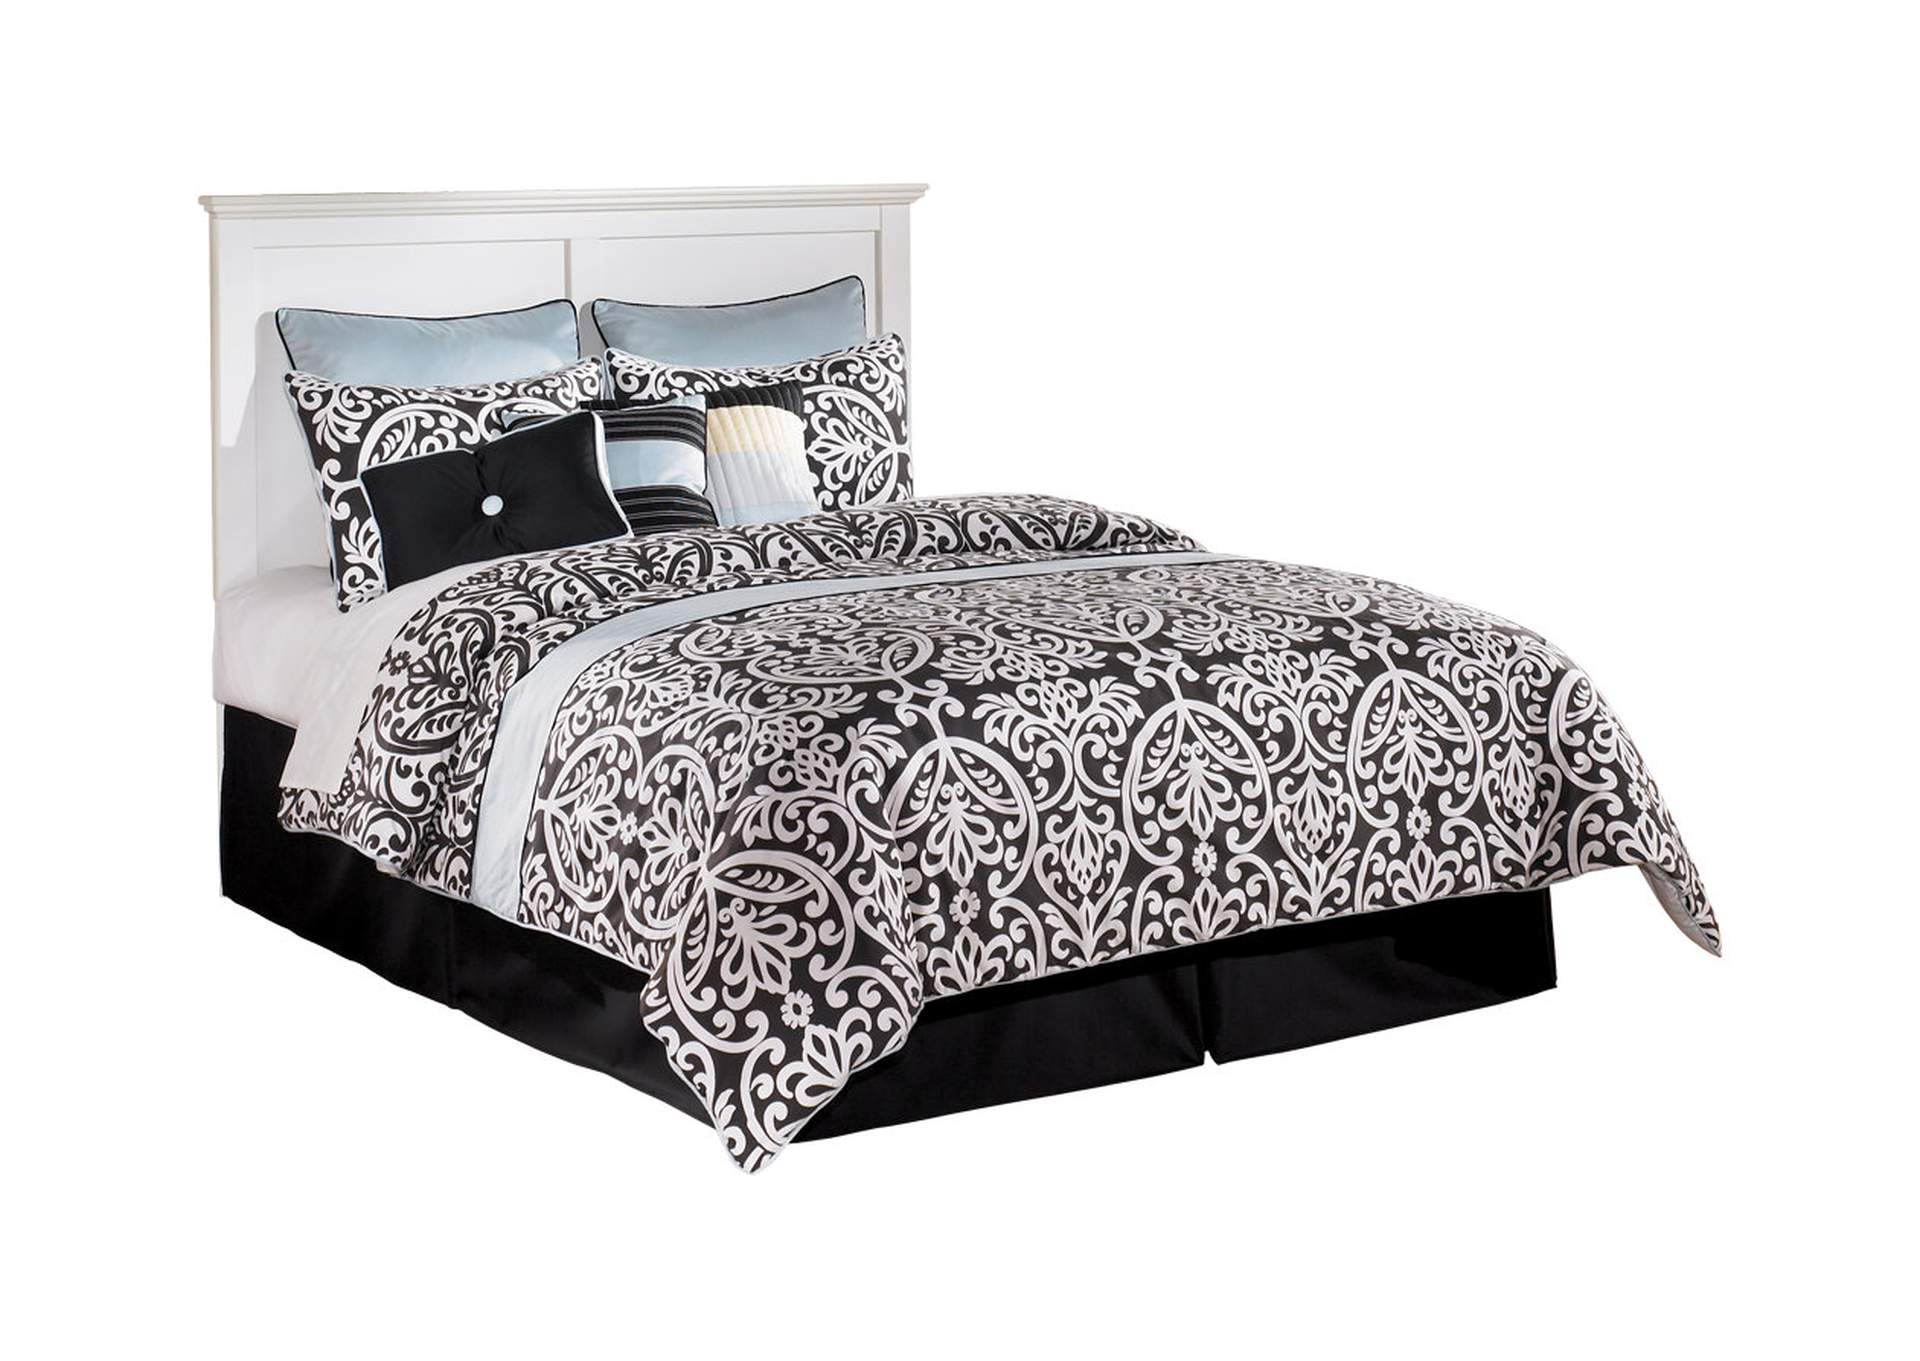 Bostwick Shoals Queen Panel Bed, Dresser and Mirror,Signature Design By Ashley